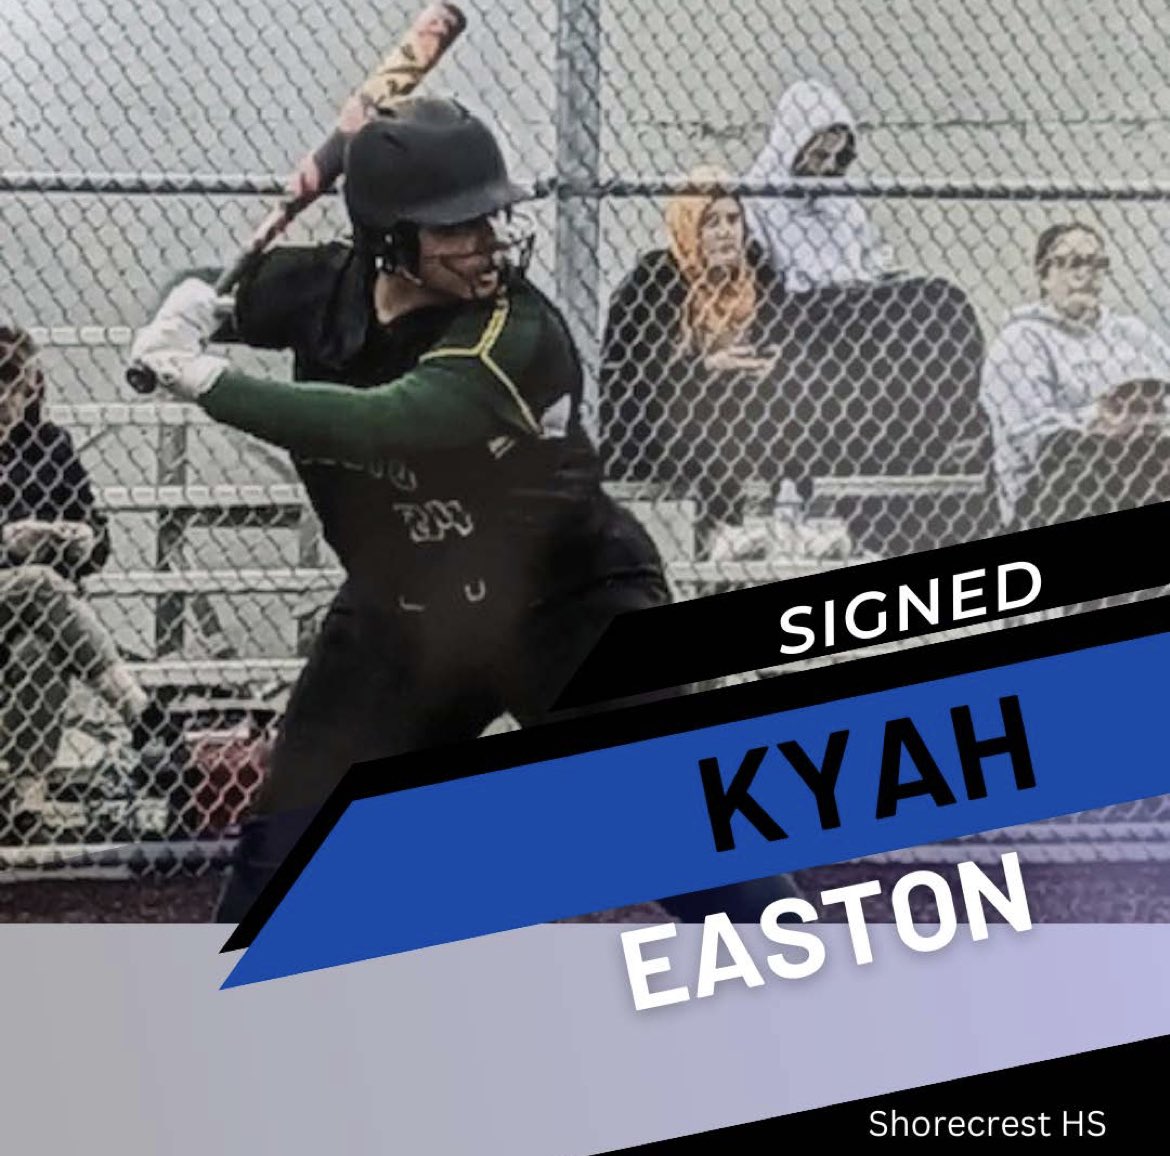 We are excited to announce the latest Triton signing for next year. Welcome local player, Kyah Easton from Shorecrest High School. The power hitting 3rd baseman also hits for average to go along with a great glove. Welcome to the Triton Family Kyah. #Team46 #ETO🔱